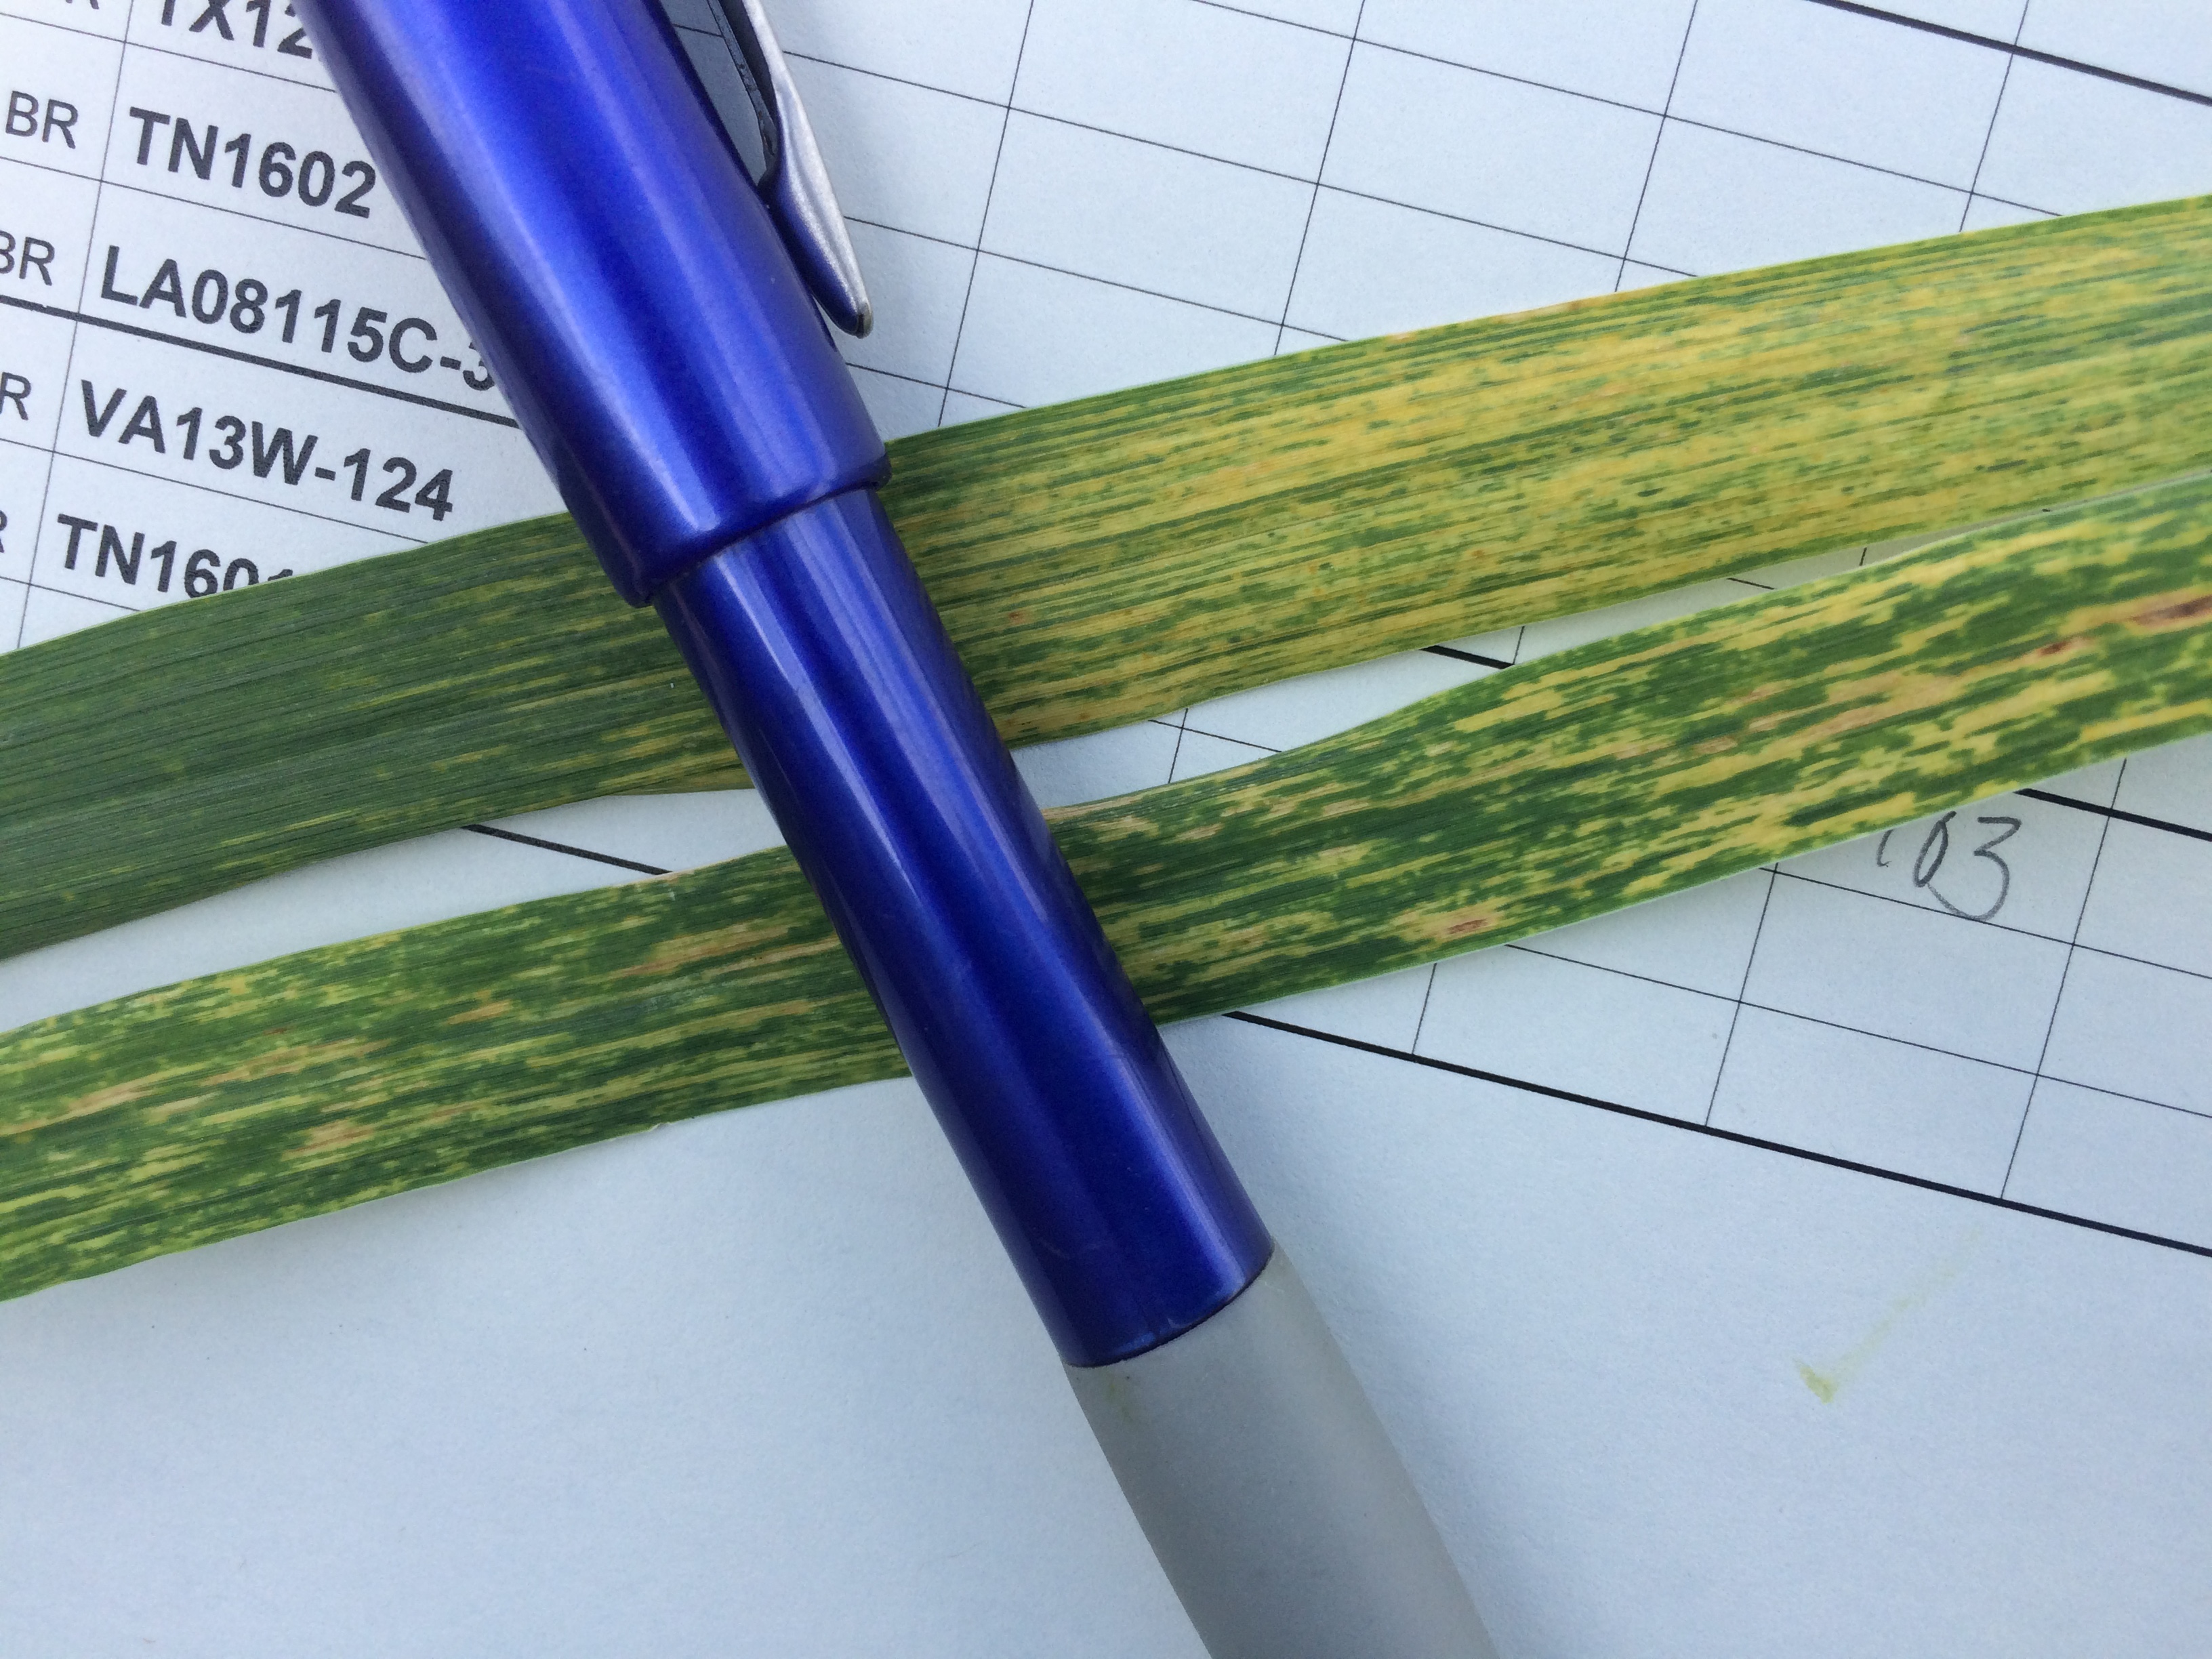 Soil-borne Wheat Mosaic Virus damage on wheat leaves. Details in text following the image.